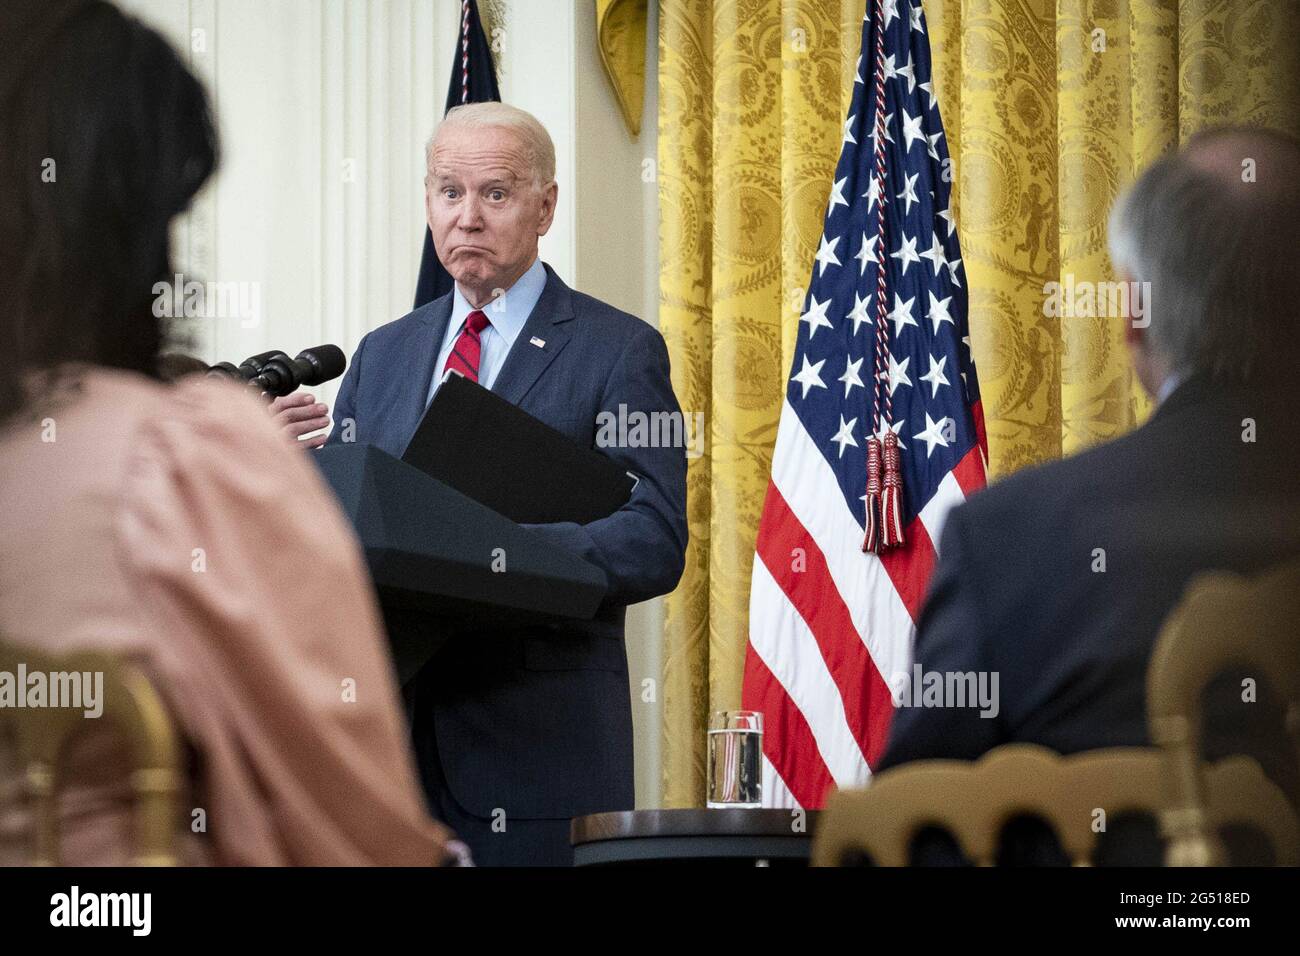 Washington, United States. 24th June, 2021. President Joe Biden delivers remarks on deals made with Senators on a bipartisan infrastructure plan in the East Room of the White House in Washington, DC, on Thursday, June 24, 2021. Photo by Sarah Silbiger/UPI Credit: UPI/Alamy Live News Stock Photo